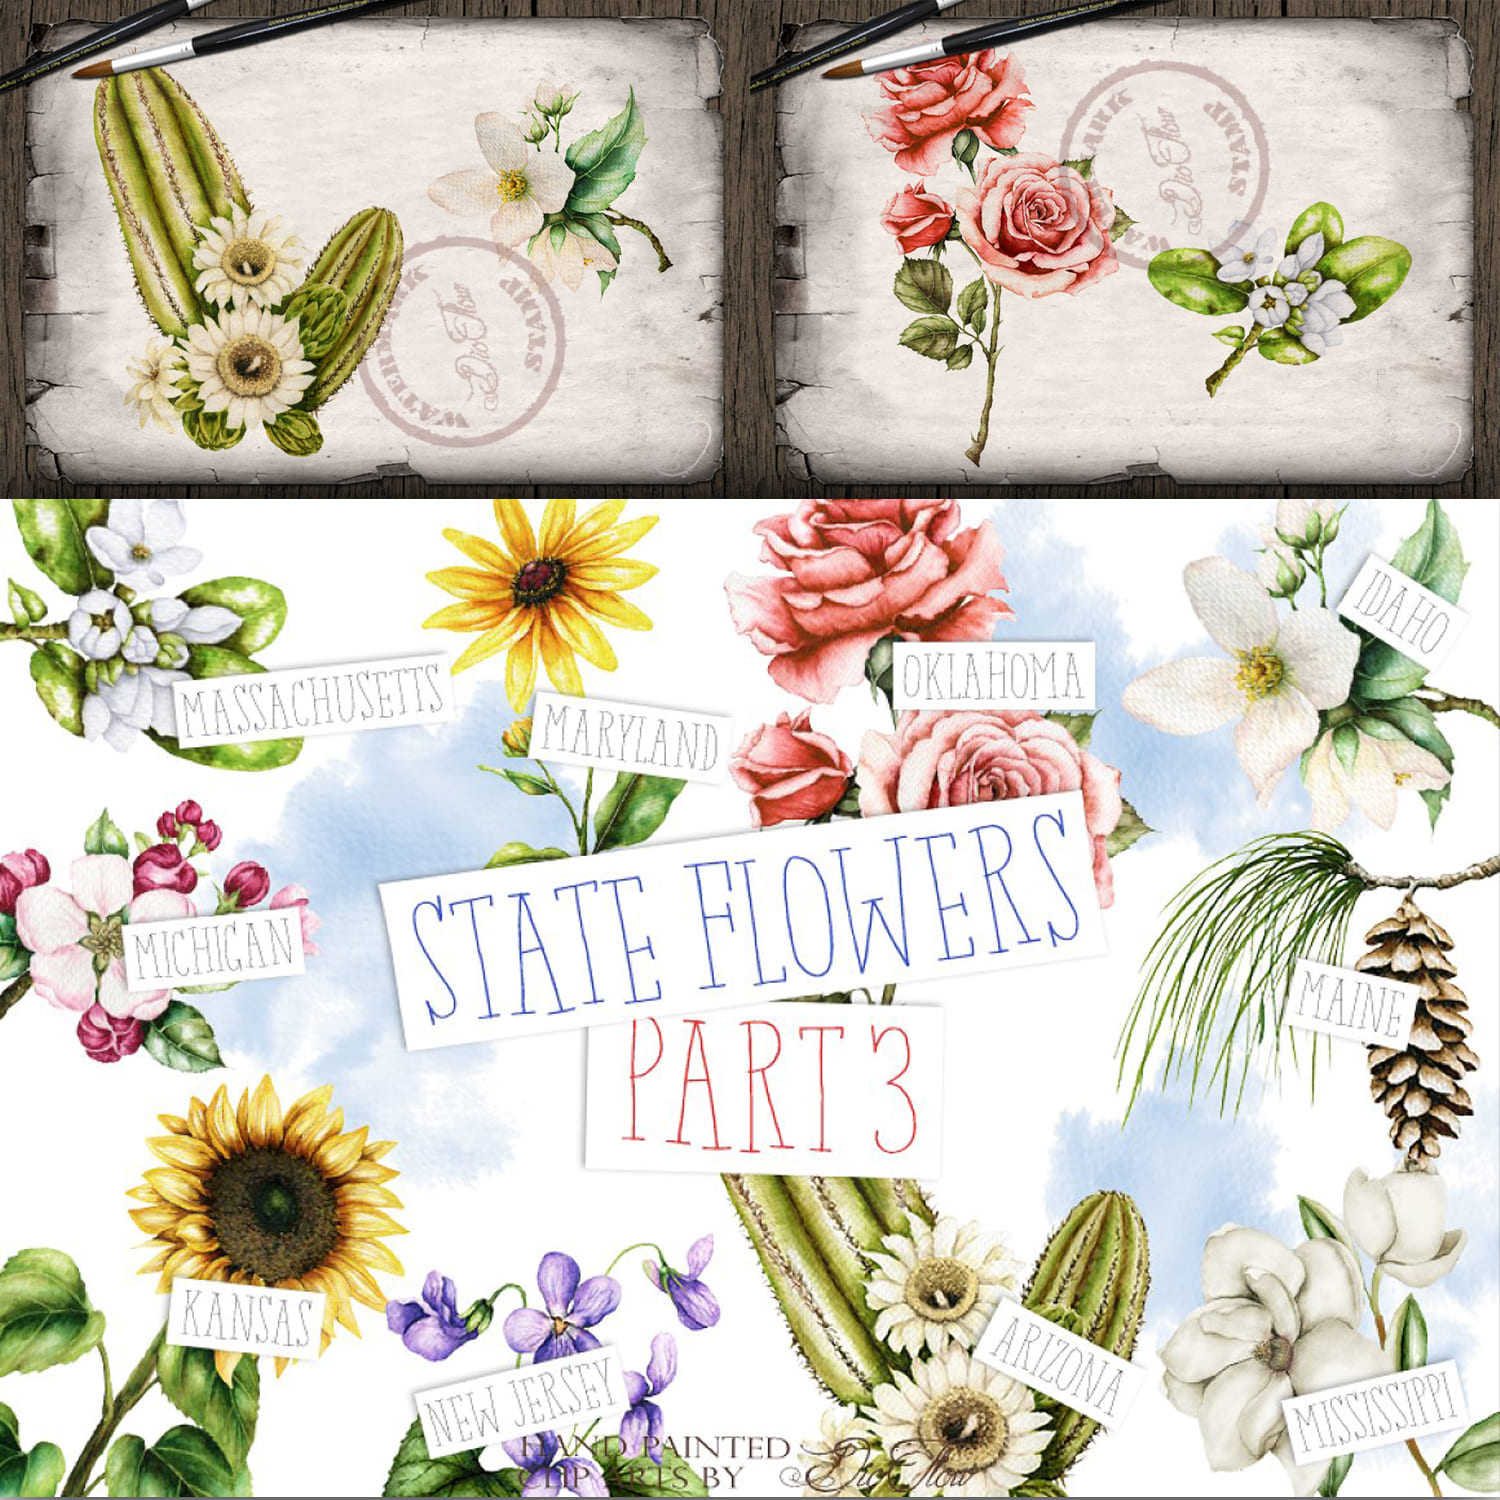 US State Flowers Part 3 Illustration cover.